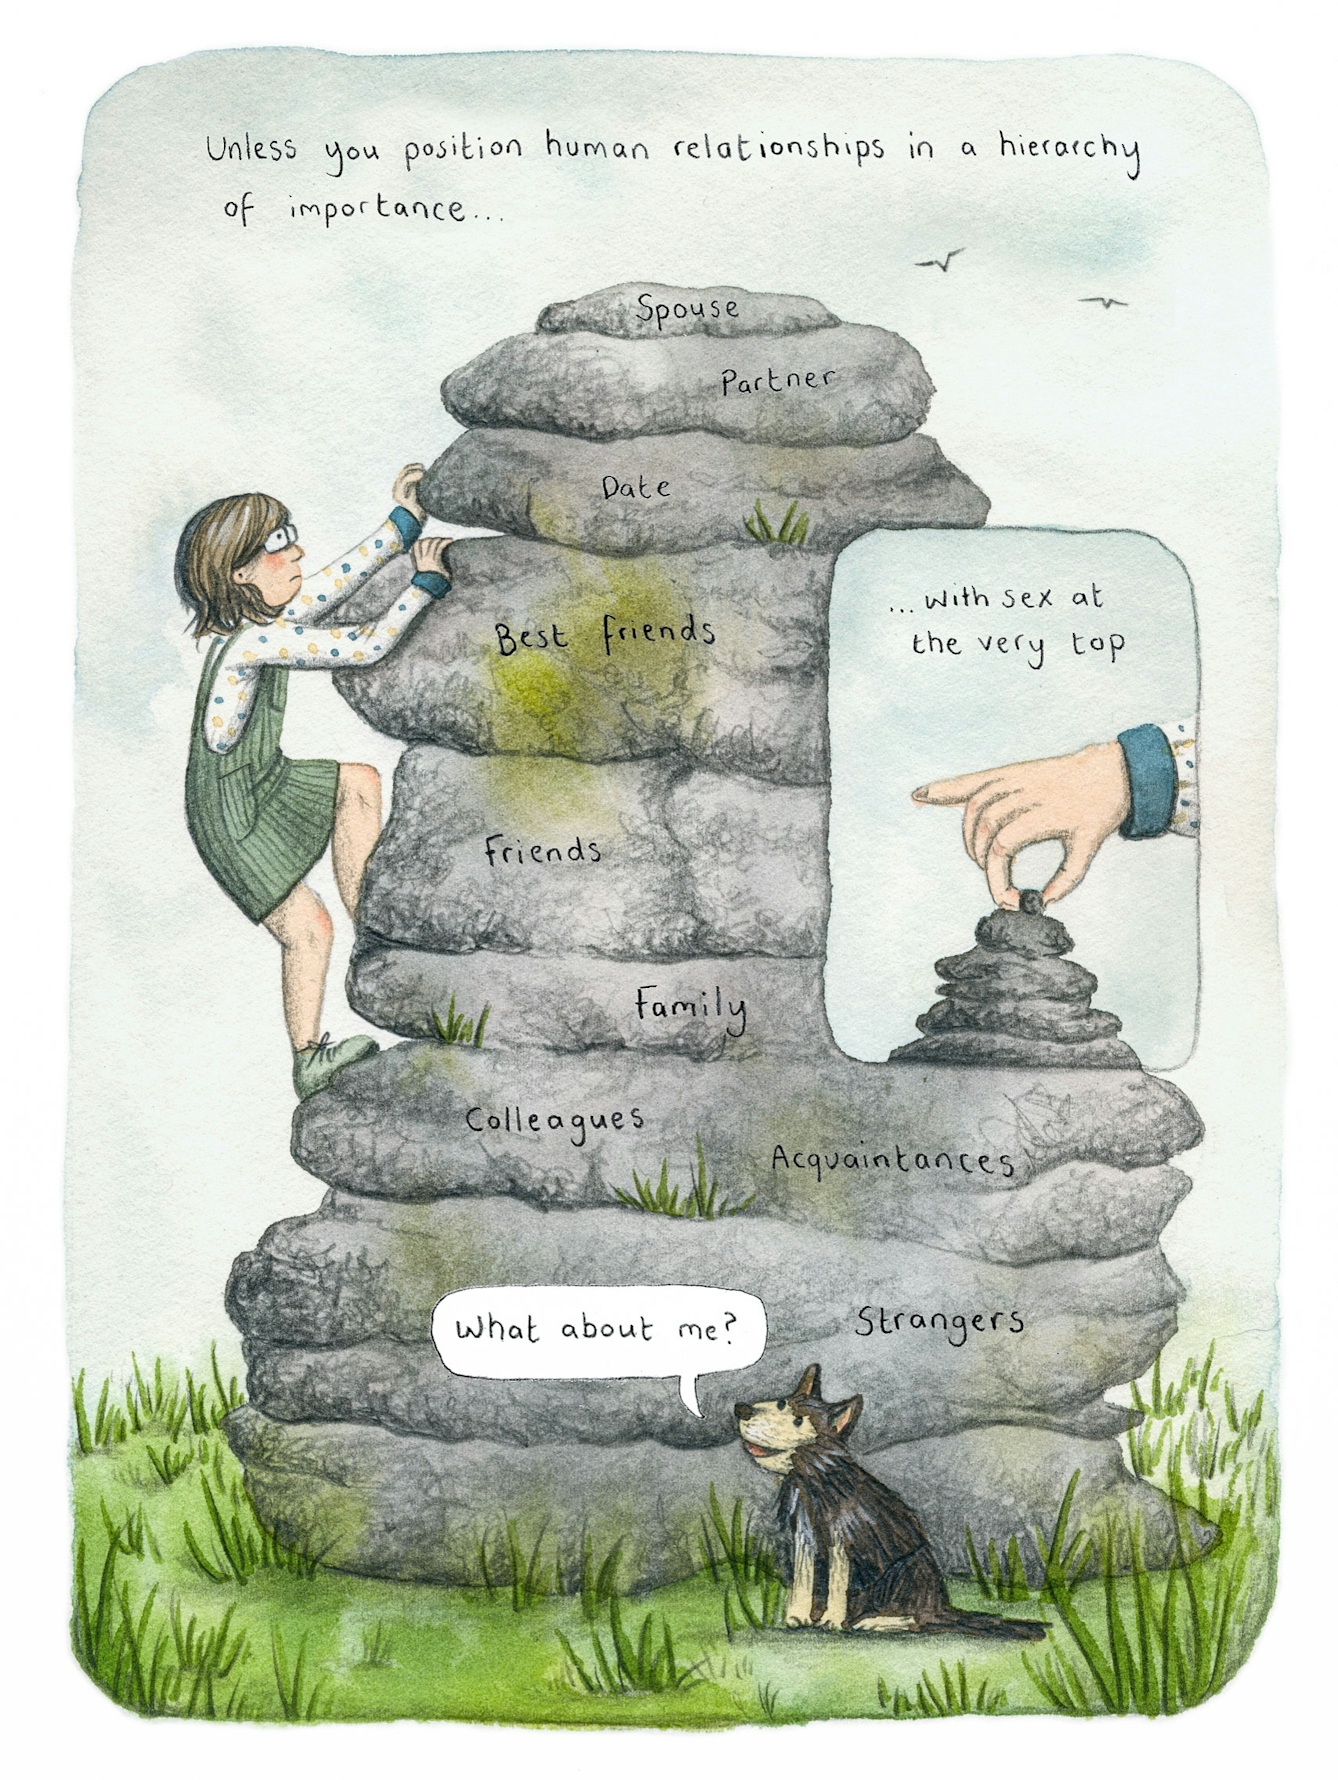 Colourful illustration showing a person with shoulder length brown hair climbing up a stack of rocks, looking anxious. They are wearing glasses, a polka dot top and a green dungaree dress. 

Text along the top reads 'Unless you position human relationships in a hierarchy of importance...'

Each rock has text on it, reading from bottom to top 'Strangers. Acquaintances. Colleagues. Family. Friends. Best friends. Date. Partner. Spouse'.

Inset to the main illustration is a panel showing a hand placing a small rock on top of the pile. Text above reads '... with sex at the very top'.

A small brown dog is sat on the ground beneath the rock formation, a speech bubble says ' What about me?'